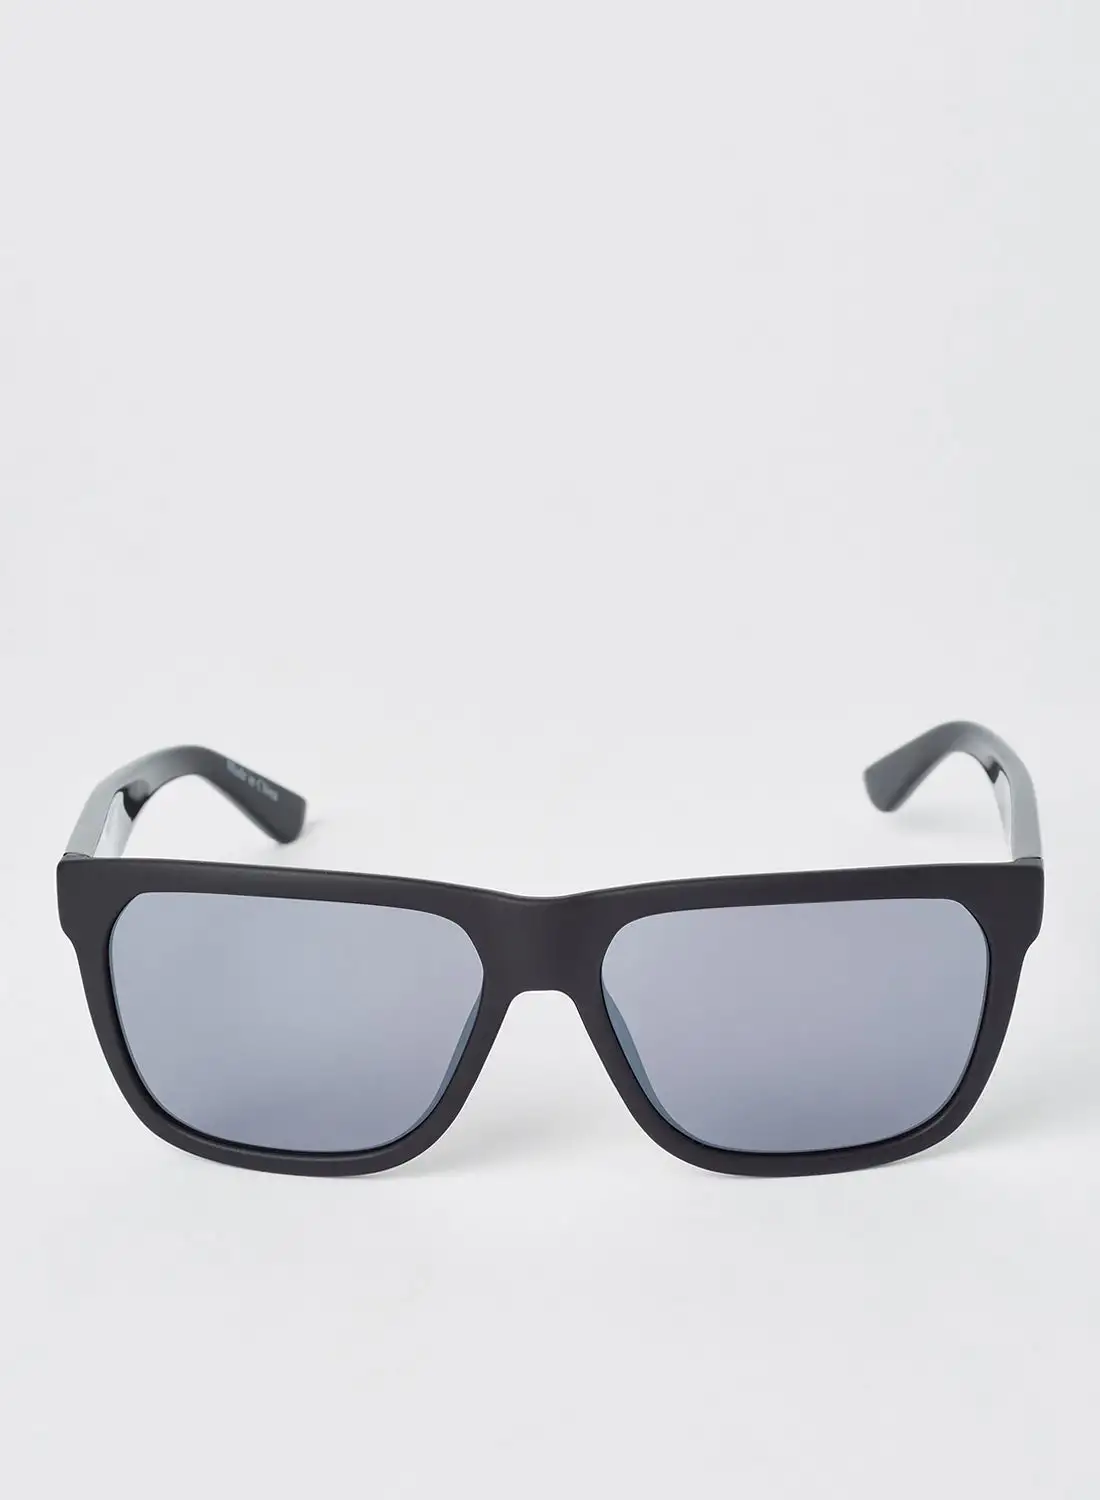 LACOSTE Full Rim Injected Modified Sunglass - Lens Size: 56 mm